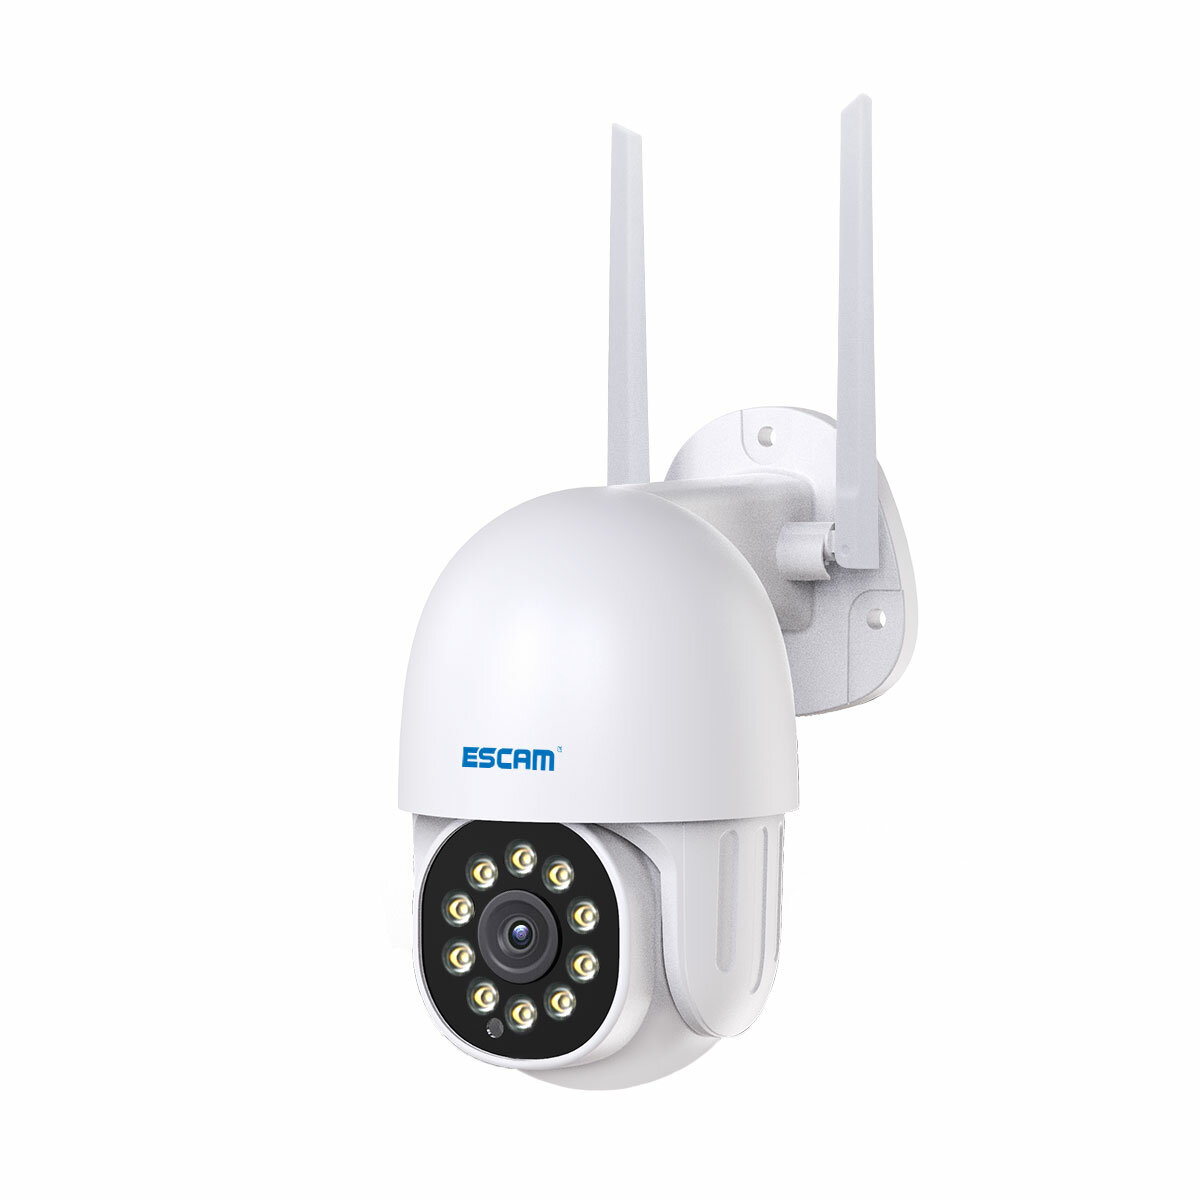 ESCAM PT202 1080P WiFi IP Camera Infrared Night Vision Waterproof With Motions Detection And Automatic Tracking Of Human